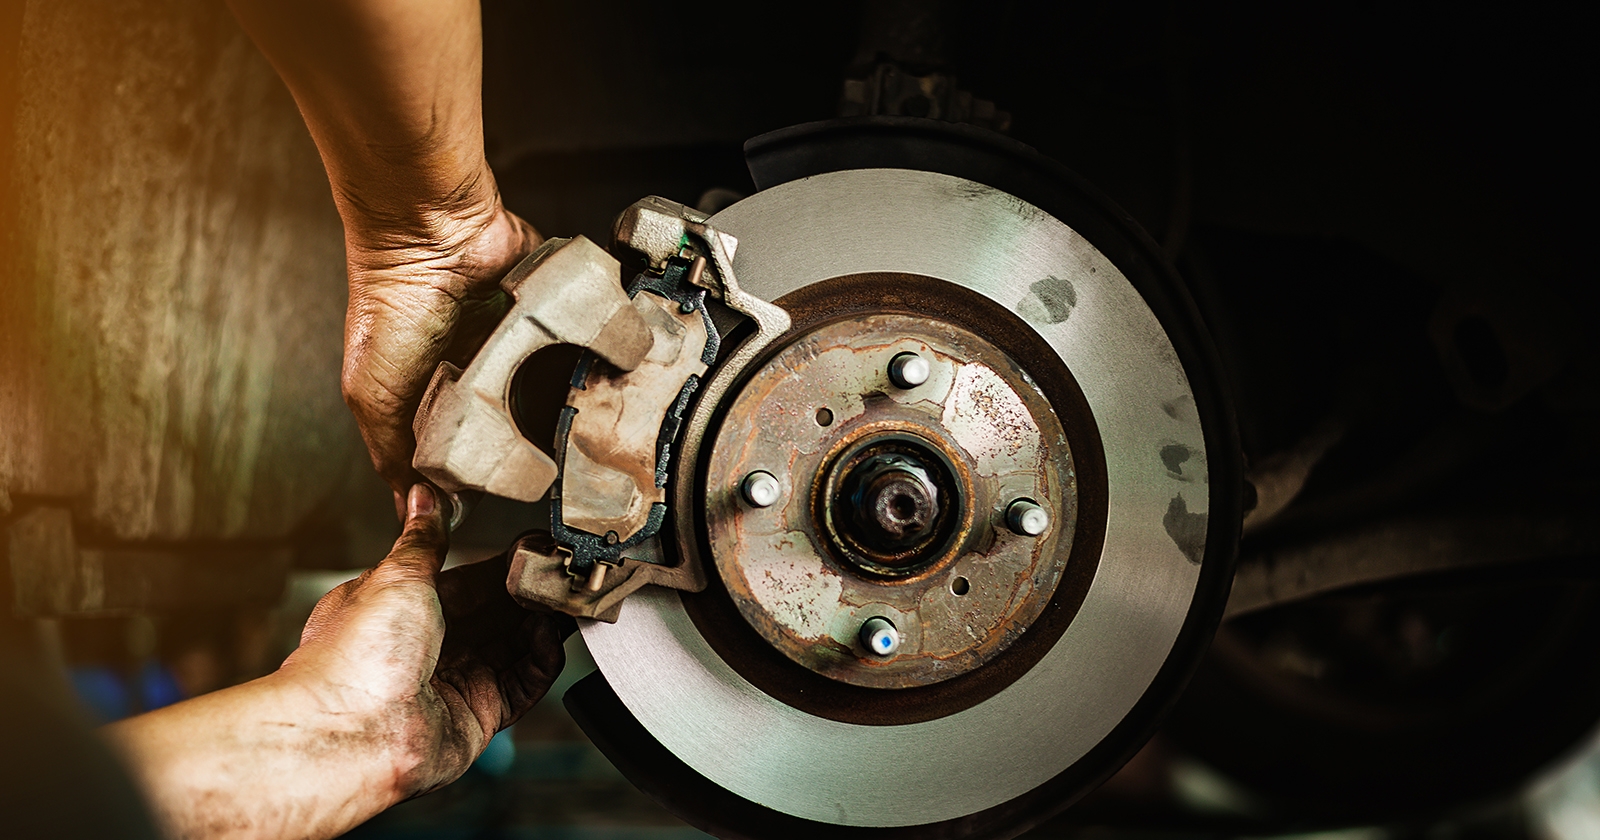 Automotive brake pads. Exponent materials engineers consult on corrosion and environment-related degradation challenges.